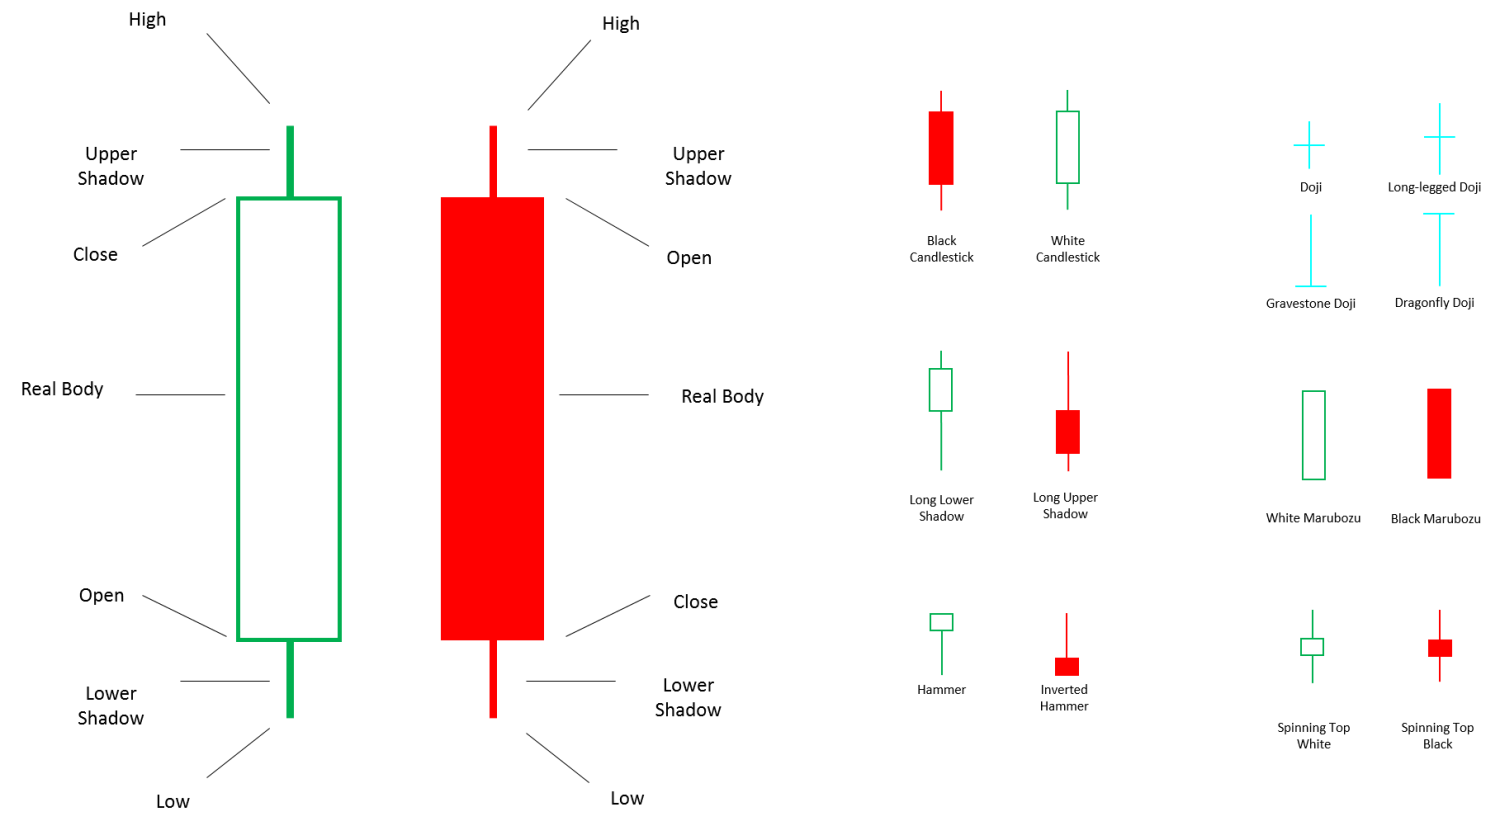 About Candlestick Patterns